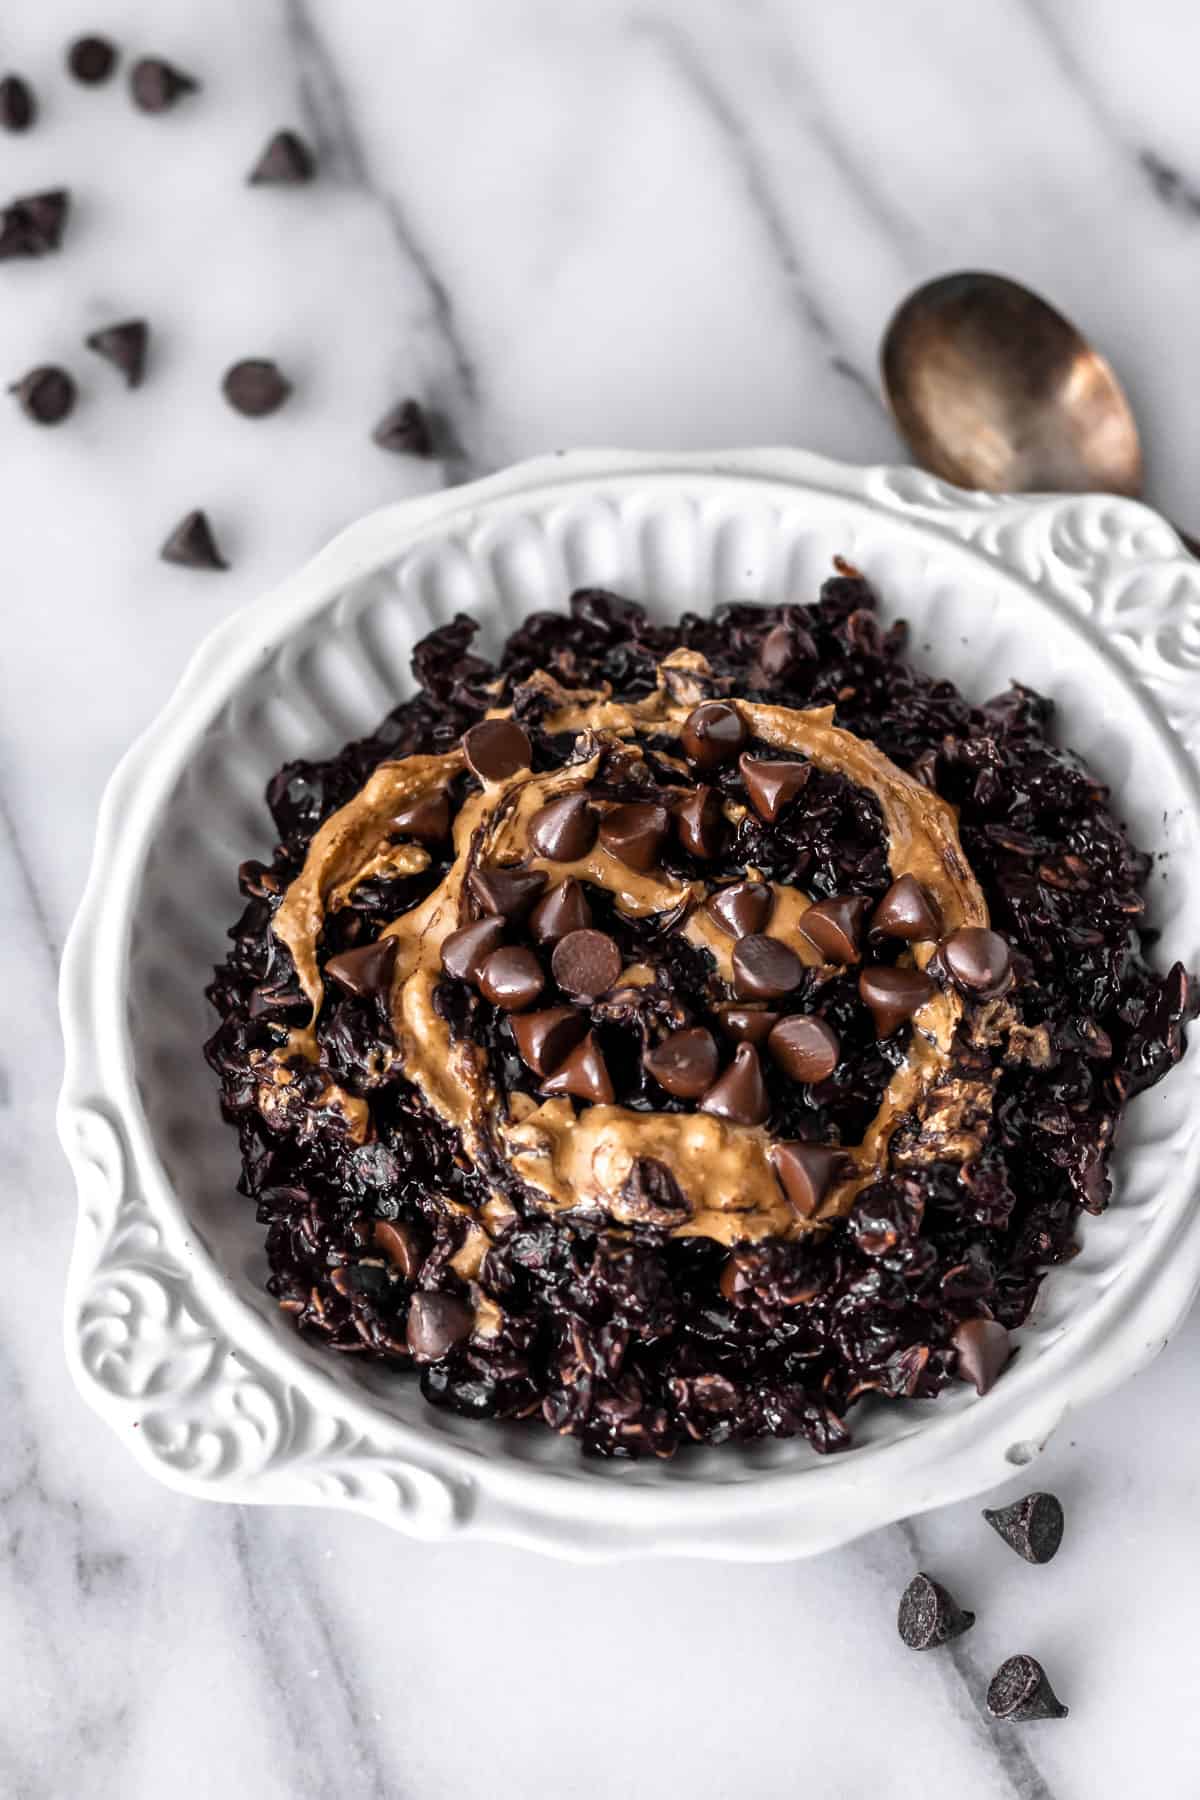 A white bowl of dark chocolate peanut butter oatmeal with chocolate chips and a spoon around it.